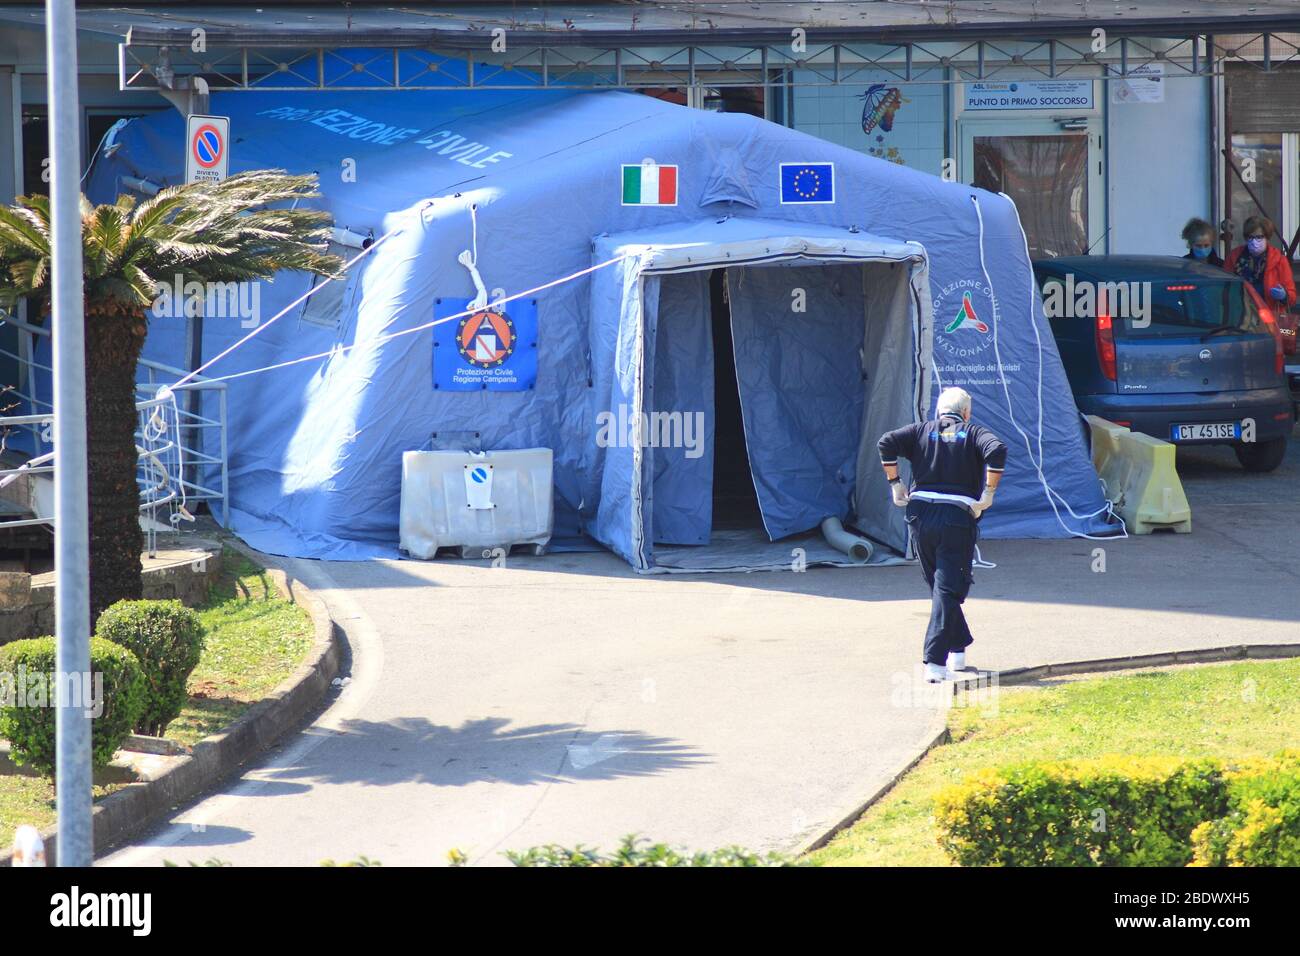 A Civil Protection tent used as pre-triage for suspected patients from Covid-19 located outside the Emergency Department of the Tortora Civil Hospital Stock Photo